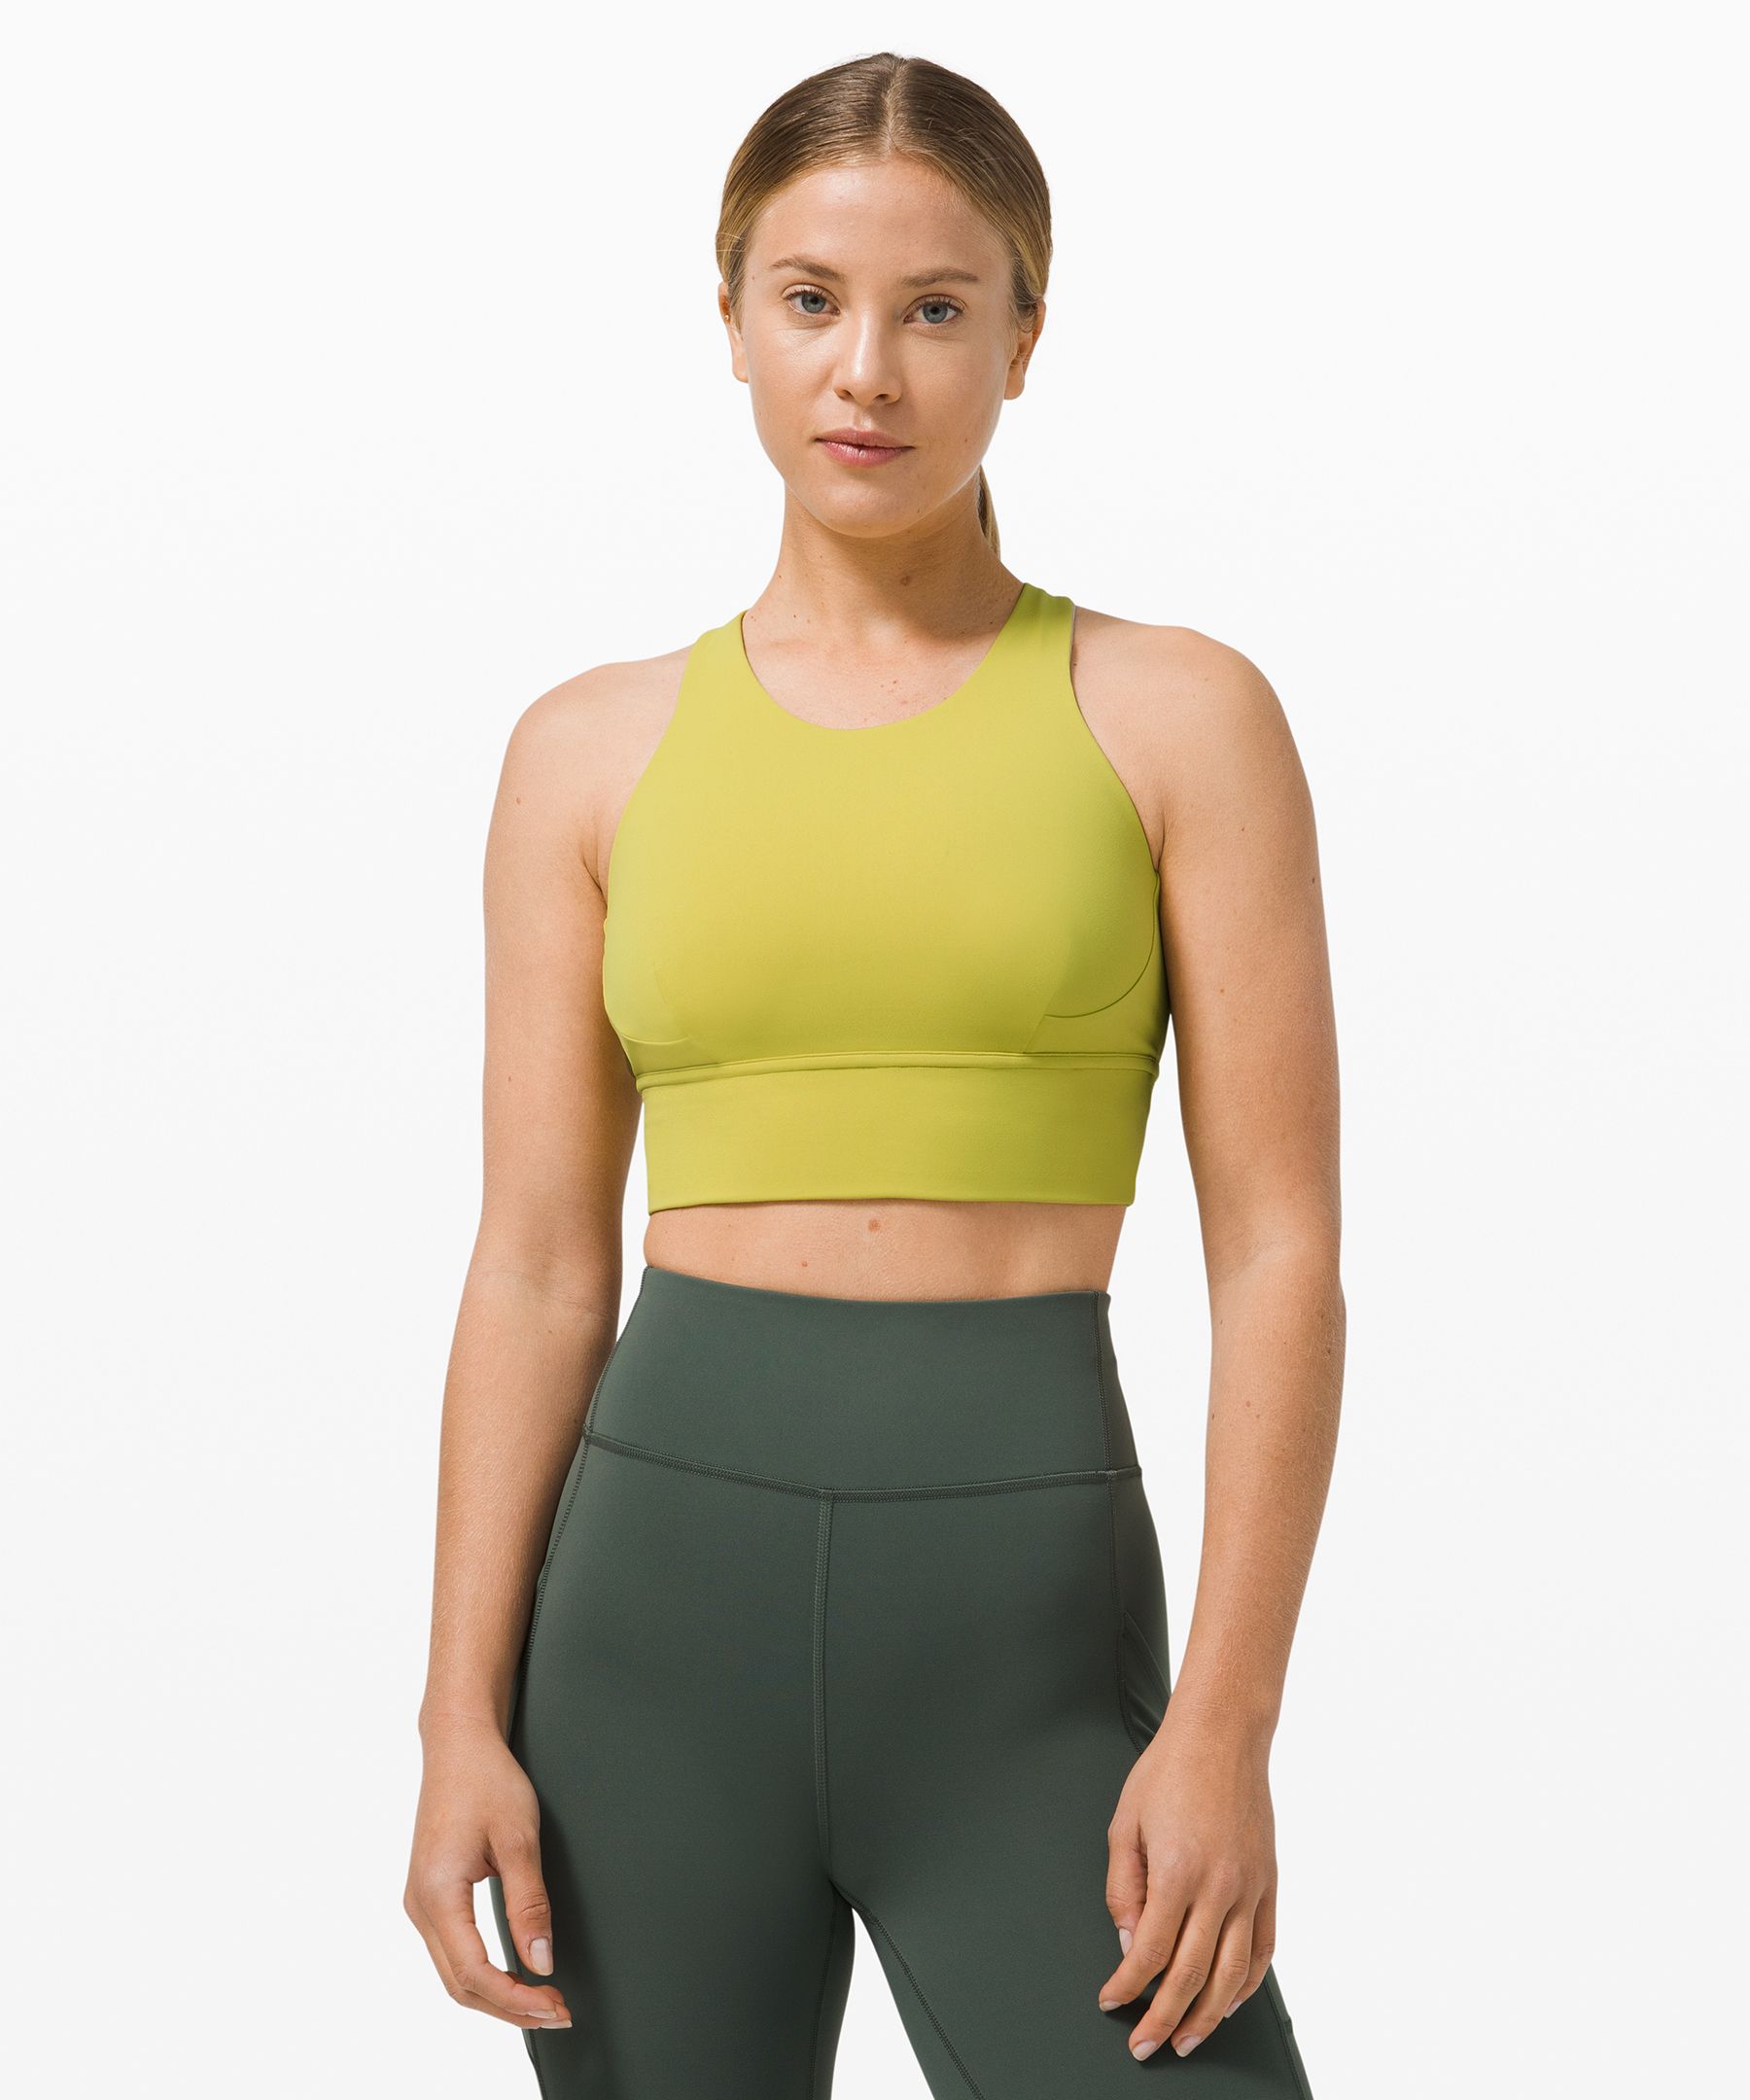 Why Is Lululemon Stock So Expensive Today 2020